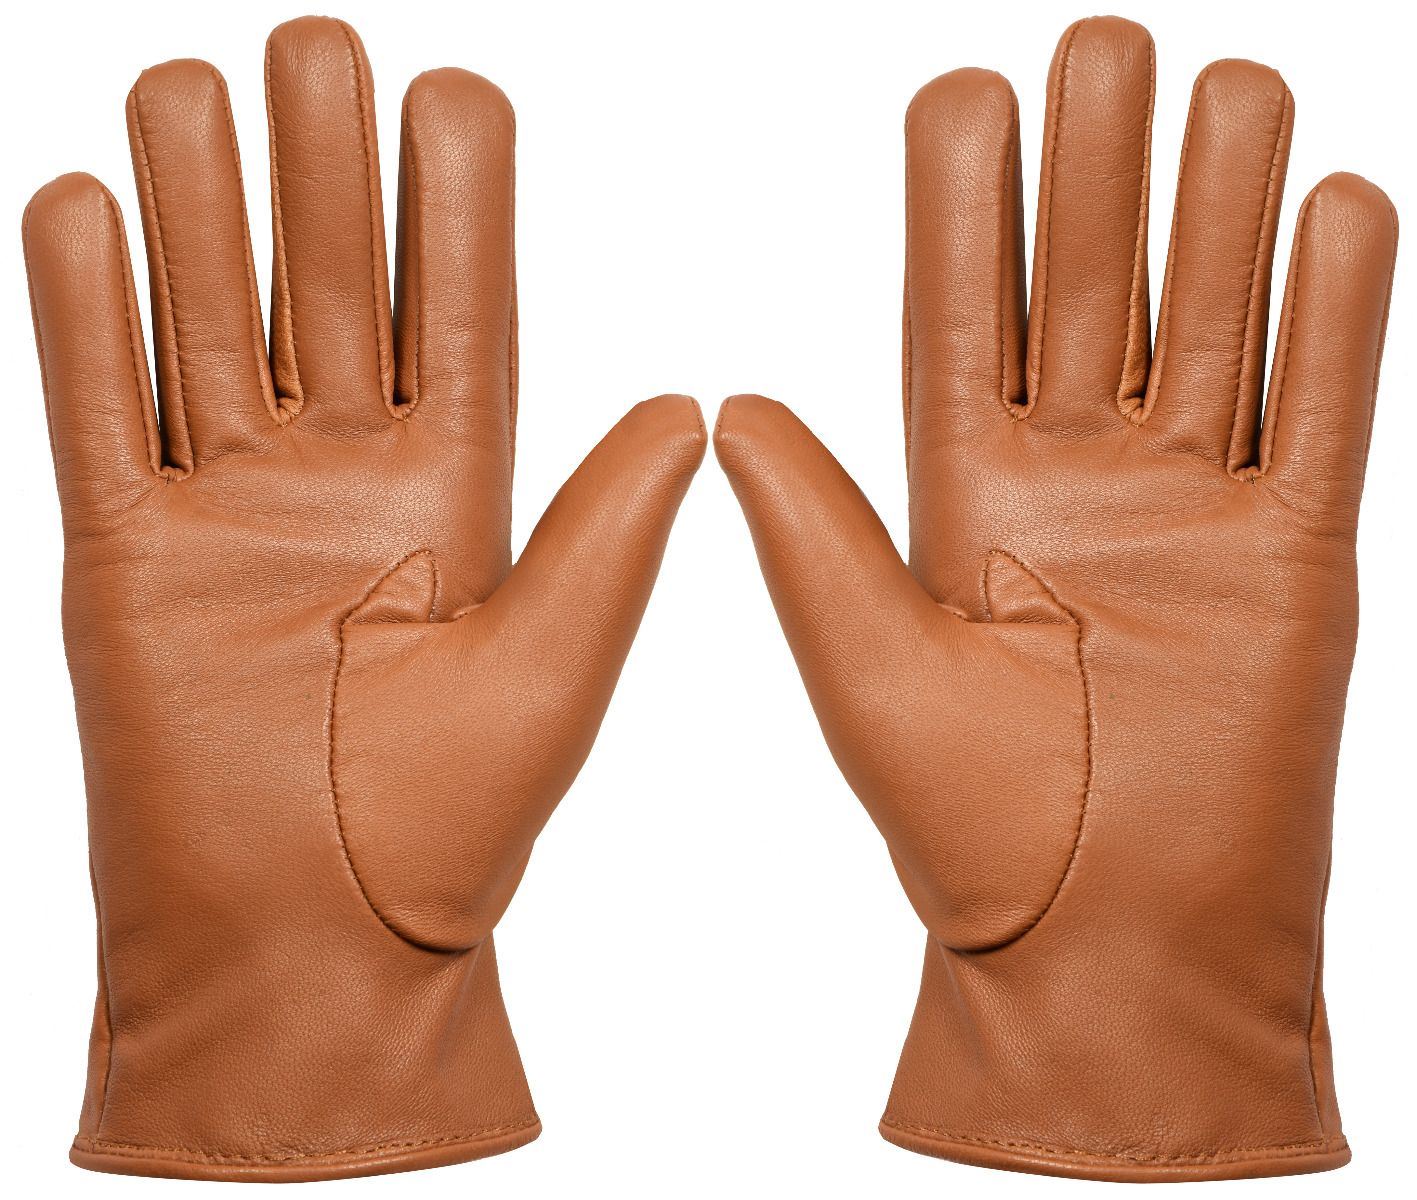 WOMENS TAN CLASSIC SOFT REAL 100% LEATHER GLOVES THERMAL LINED DRIVING FITTED - Upperclass Fashions 